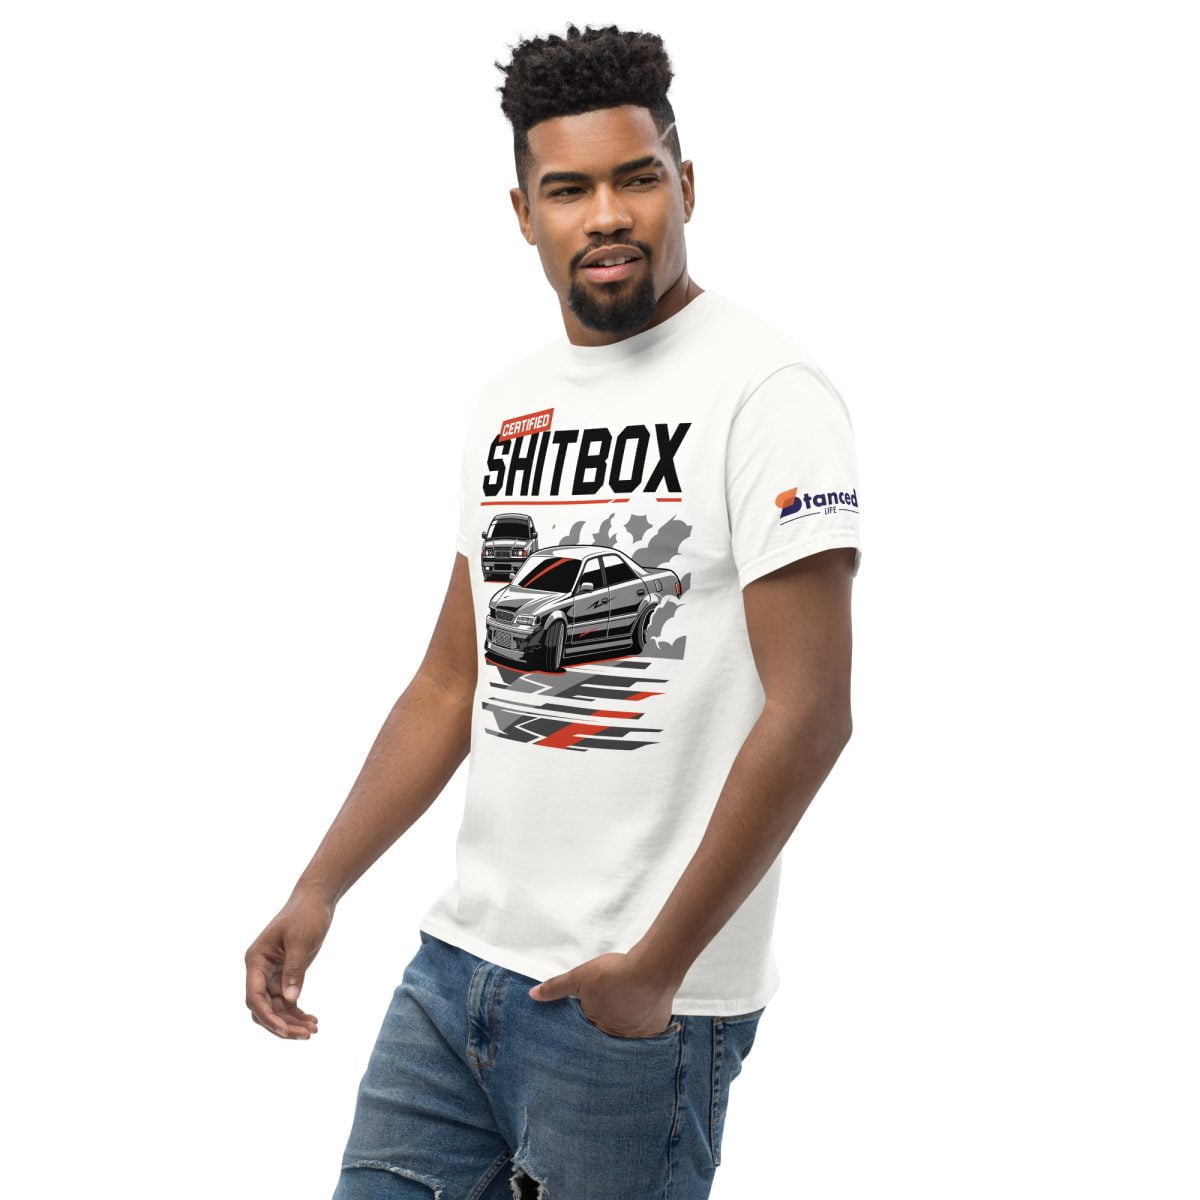 A man wearing a E36 BMW JDM JZX100 Toyota Chaser Drifting Mens T shirt Certified Shitbox showcasing his love for JDM and drifting | StancedLife